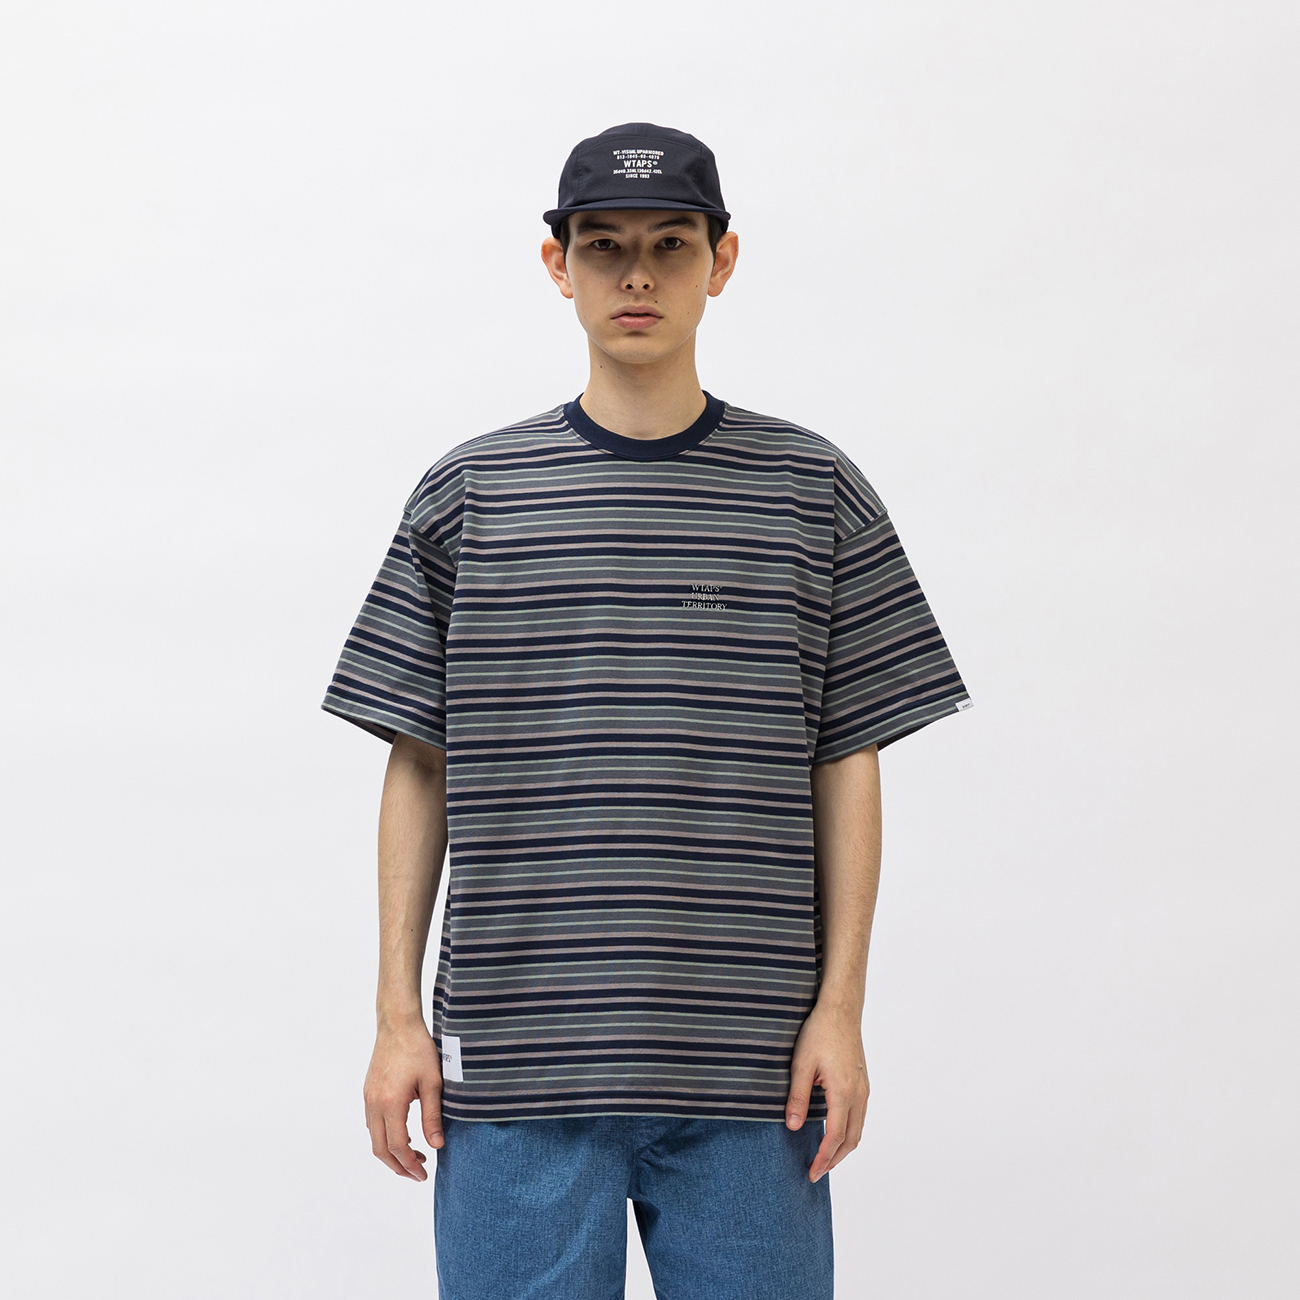 wtaps ss23 BDY 01 / COTTON. TEXTILE. WUT - Tシャツ/カットソー(七分/長袖)